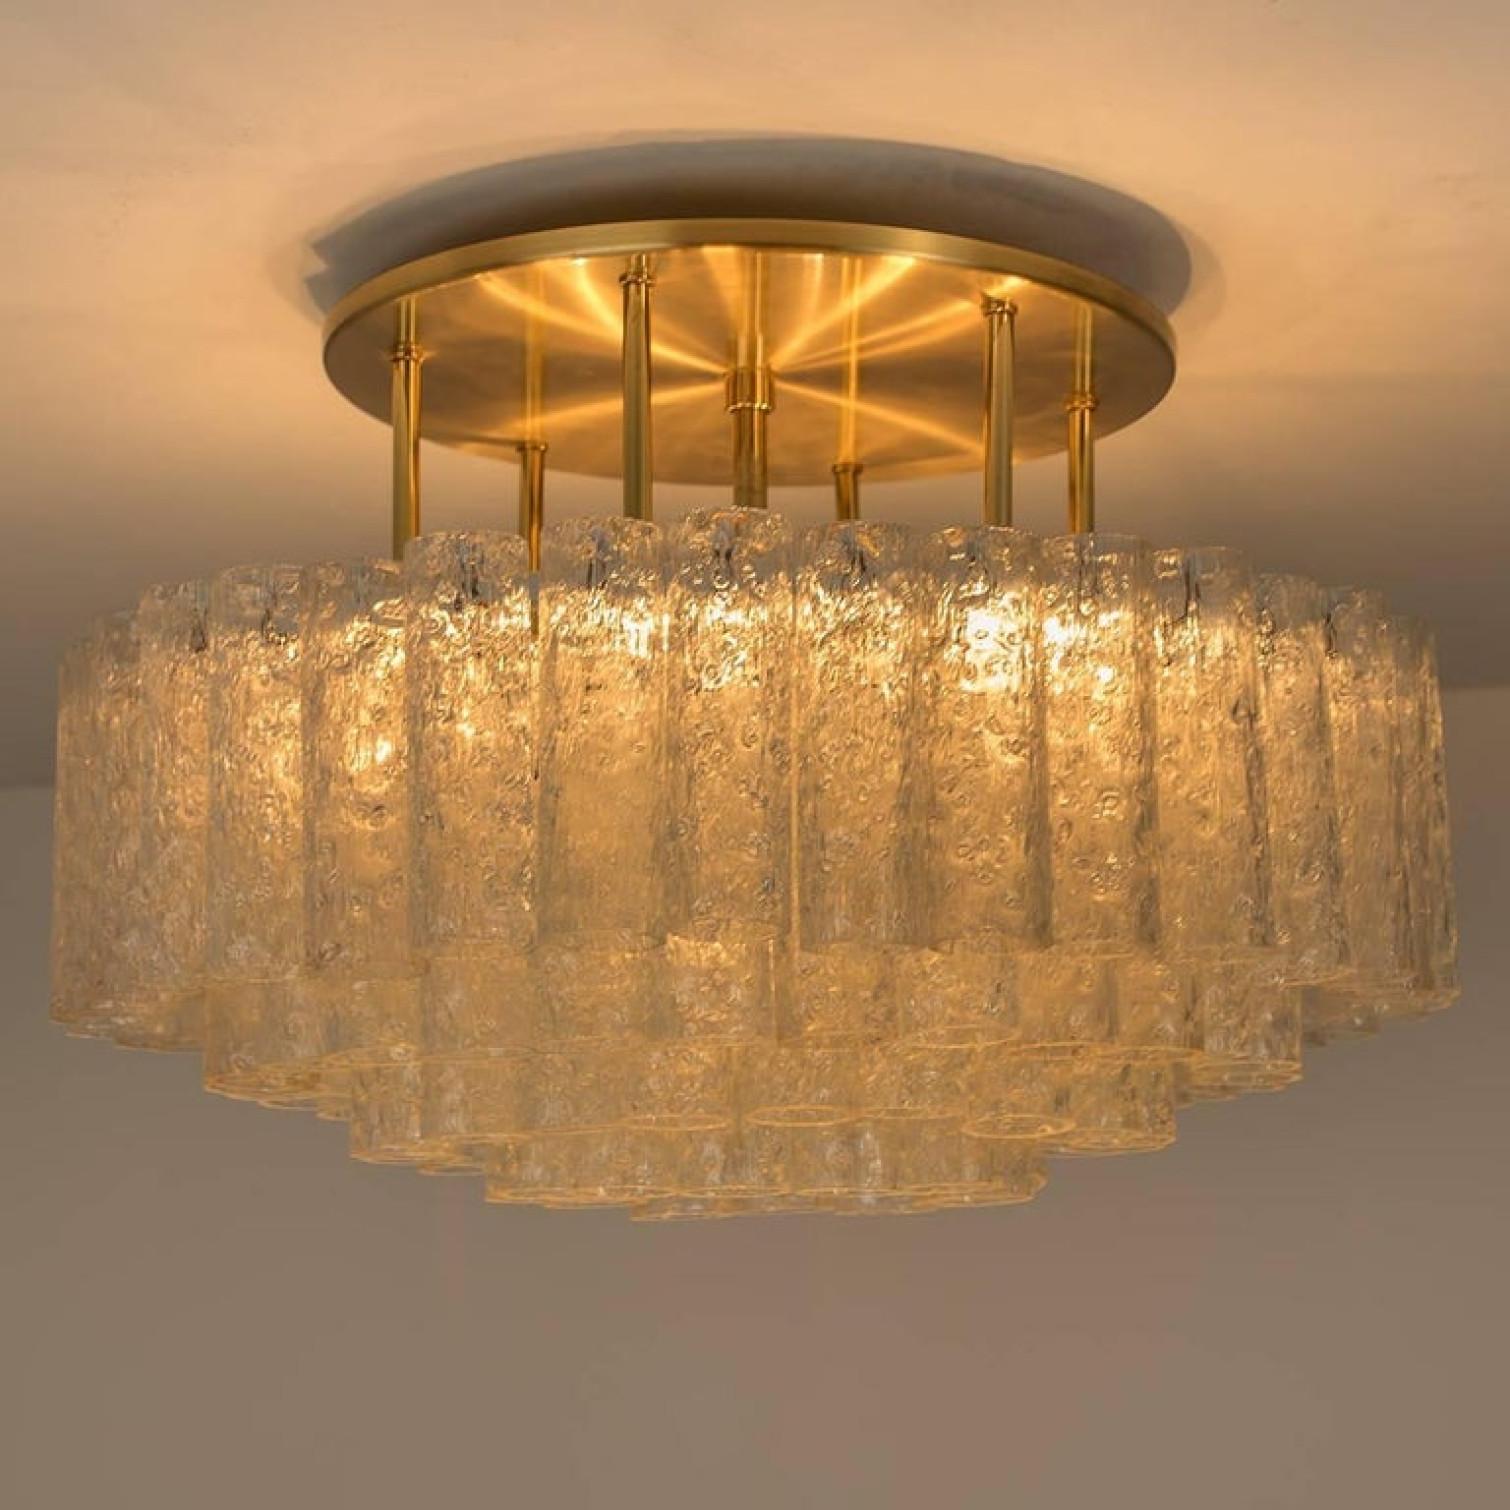 20th Century One of the Six Large Blown Glass Brass Flush Mount Light Fixtures by Doria 1960s For Sale